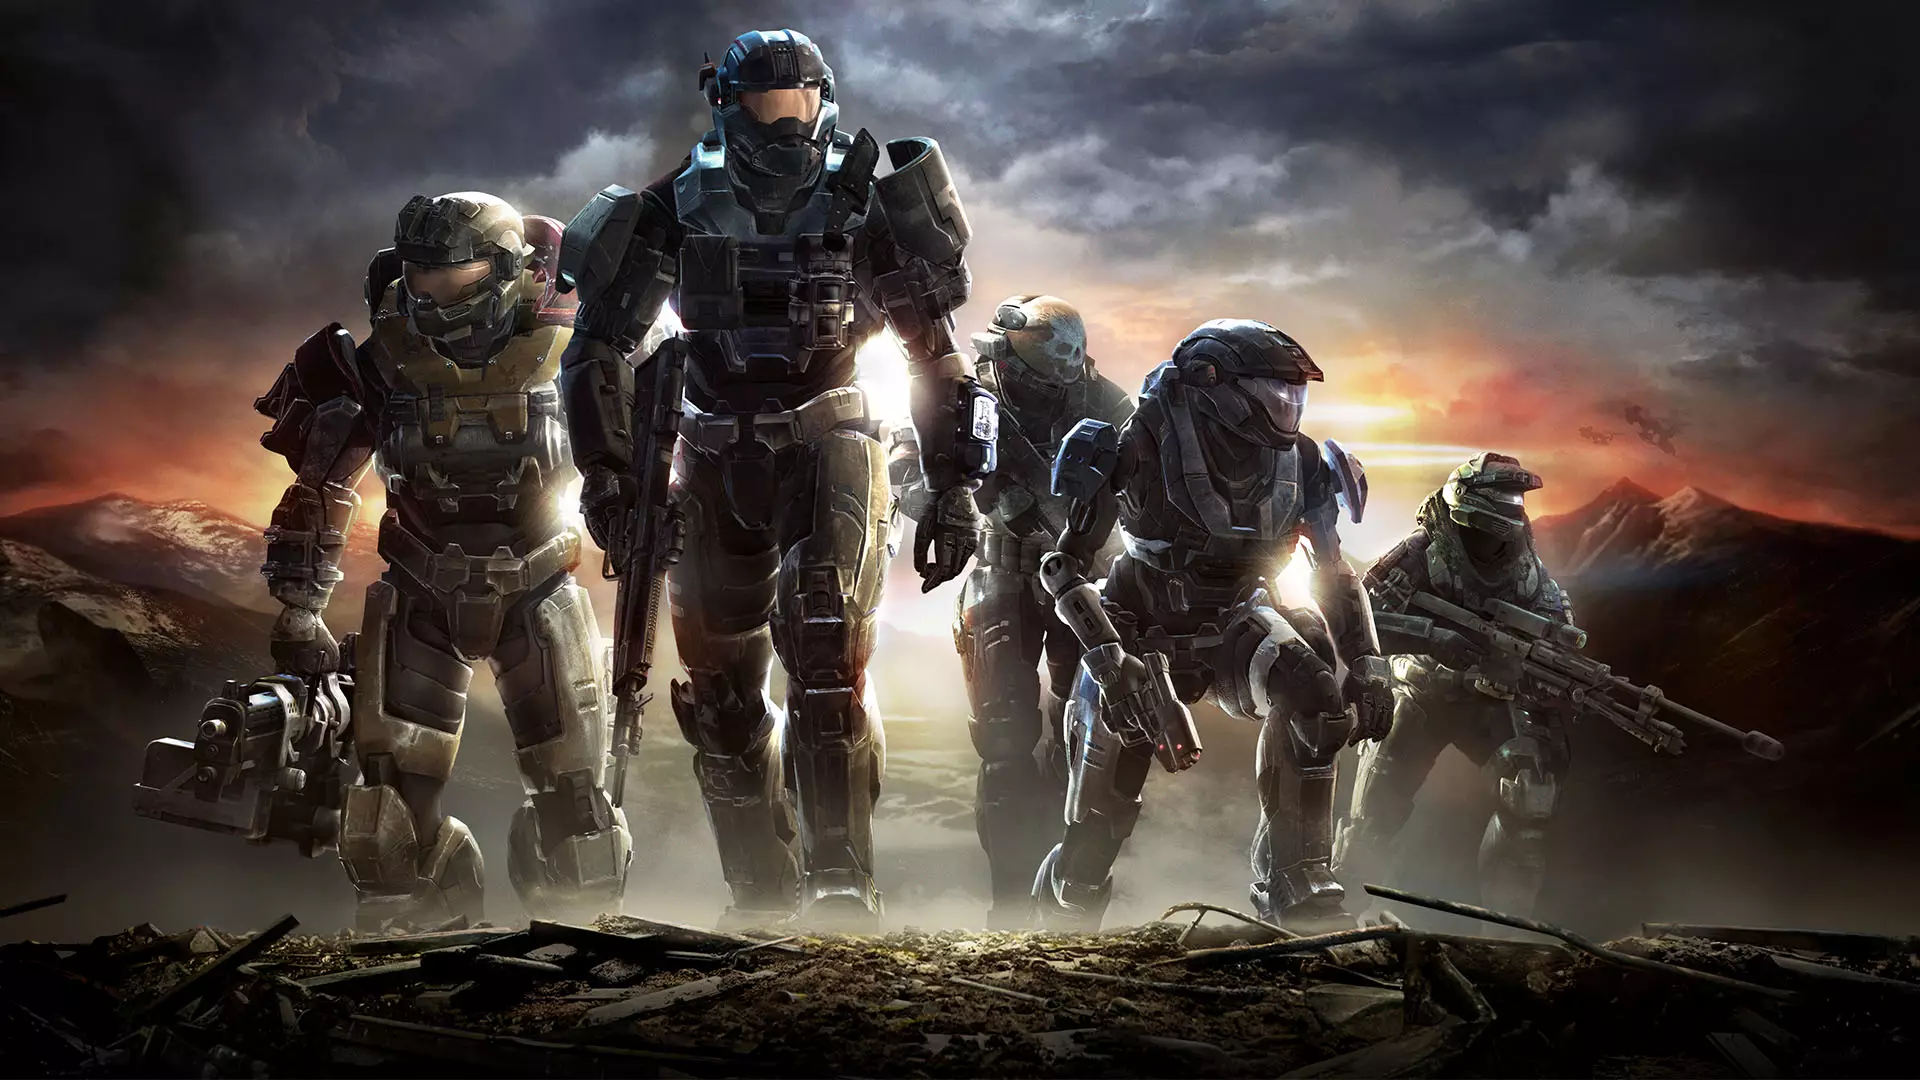 Halo: Reach was Bungie's last game in the series